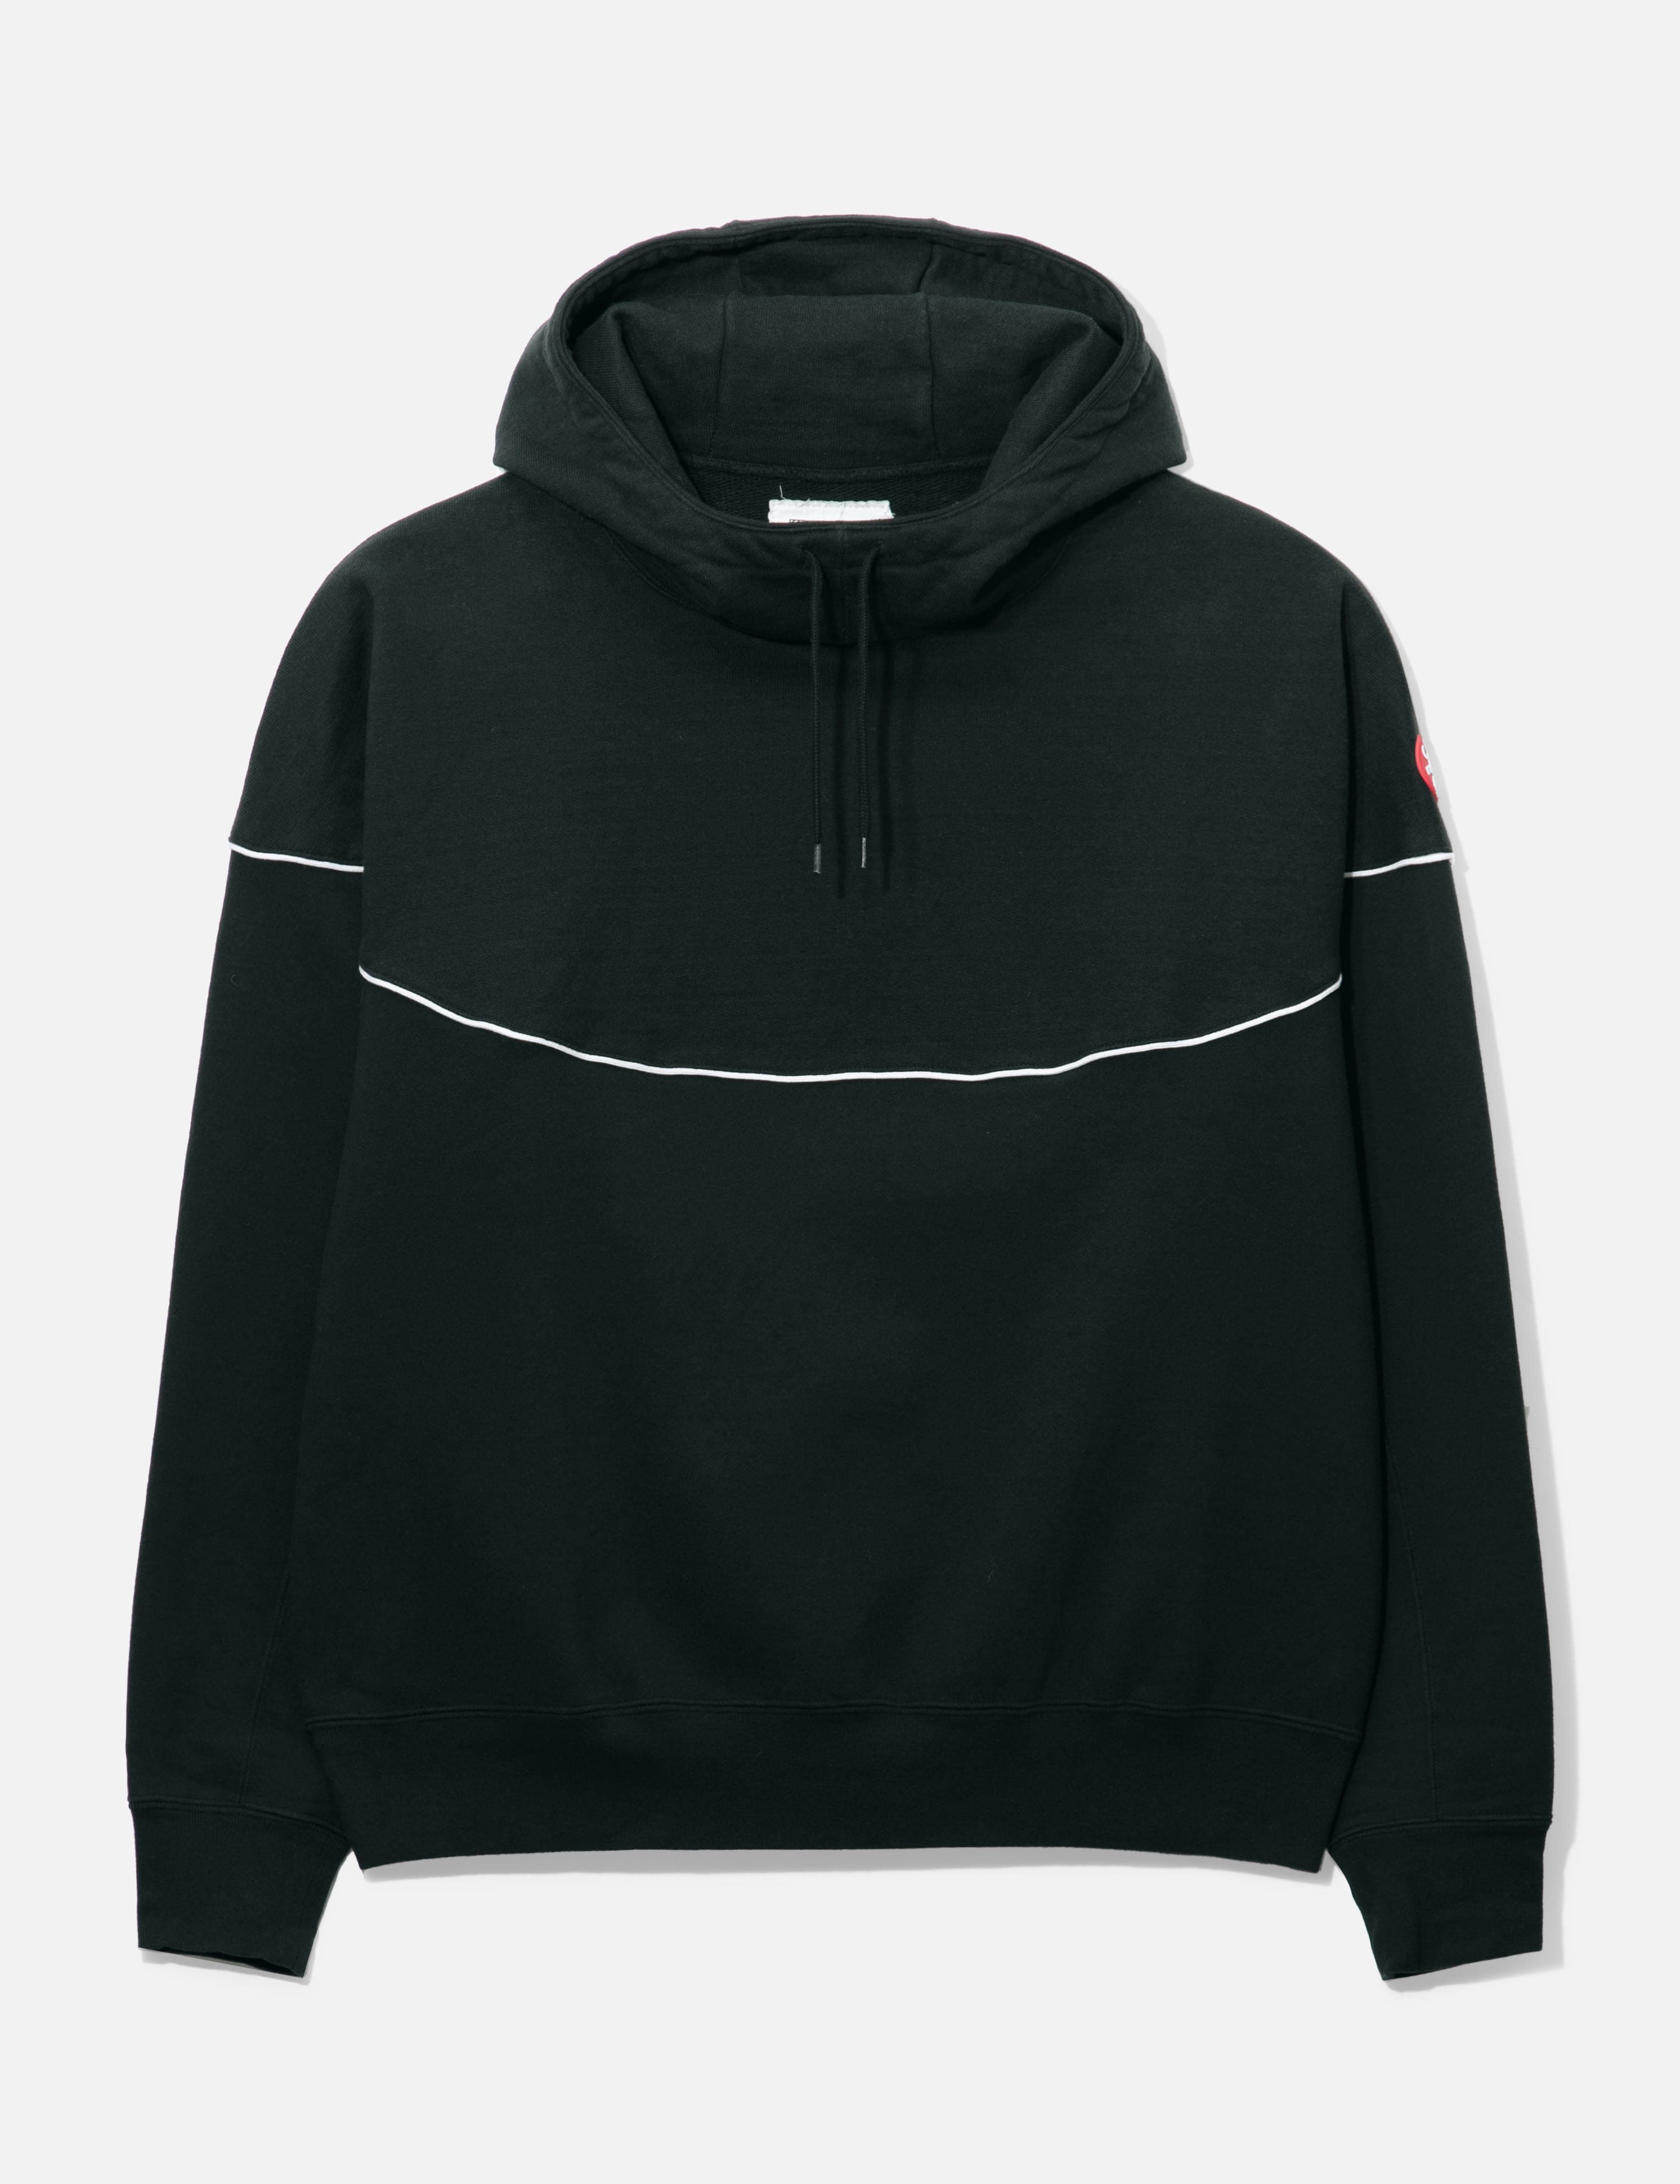 Pre-owned Hoodies | HBX - Globally Curated Fashion and Lifestyle